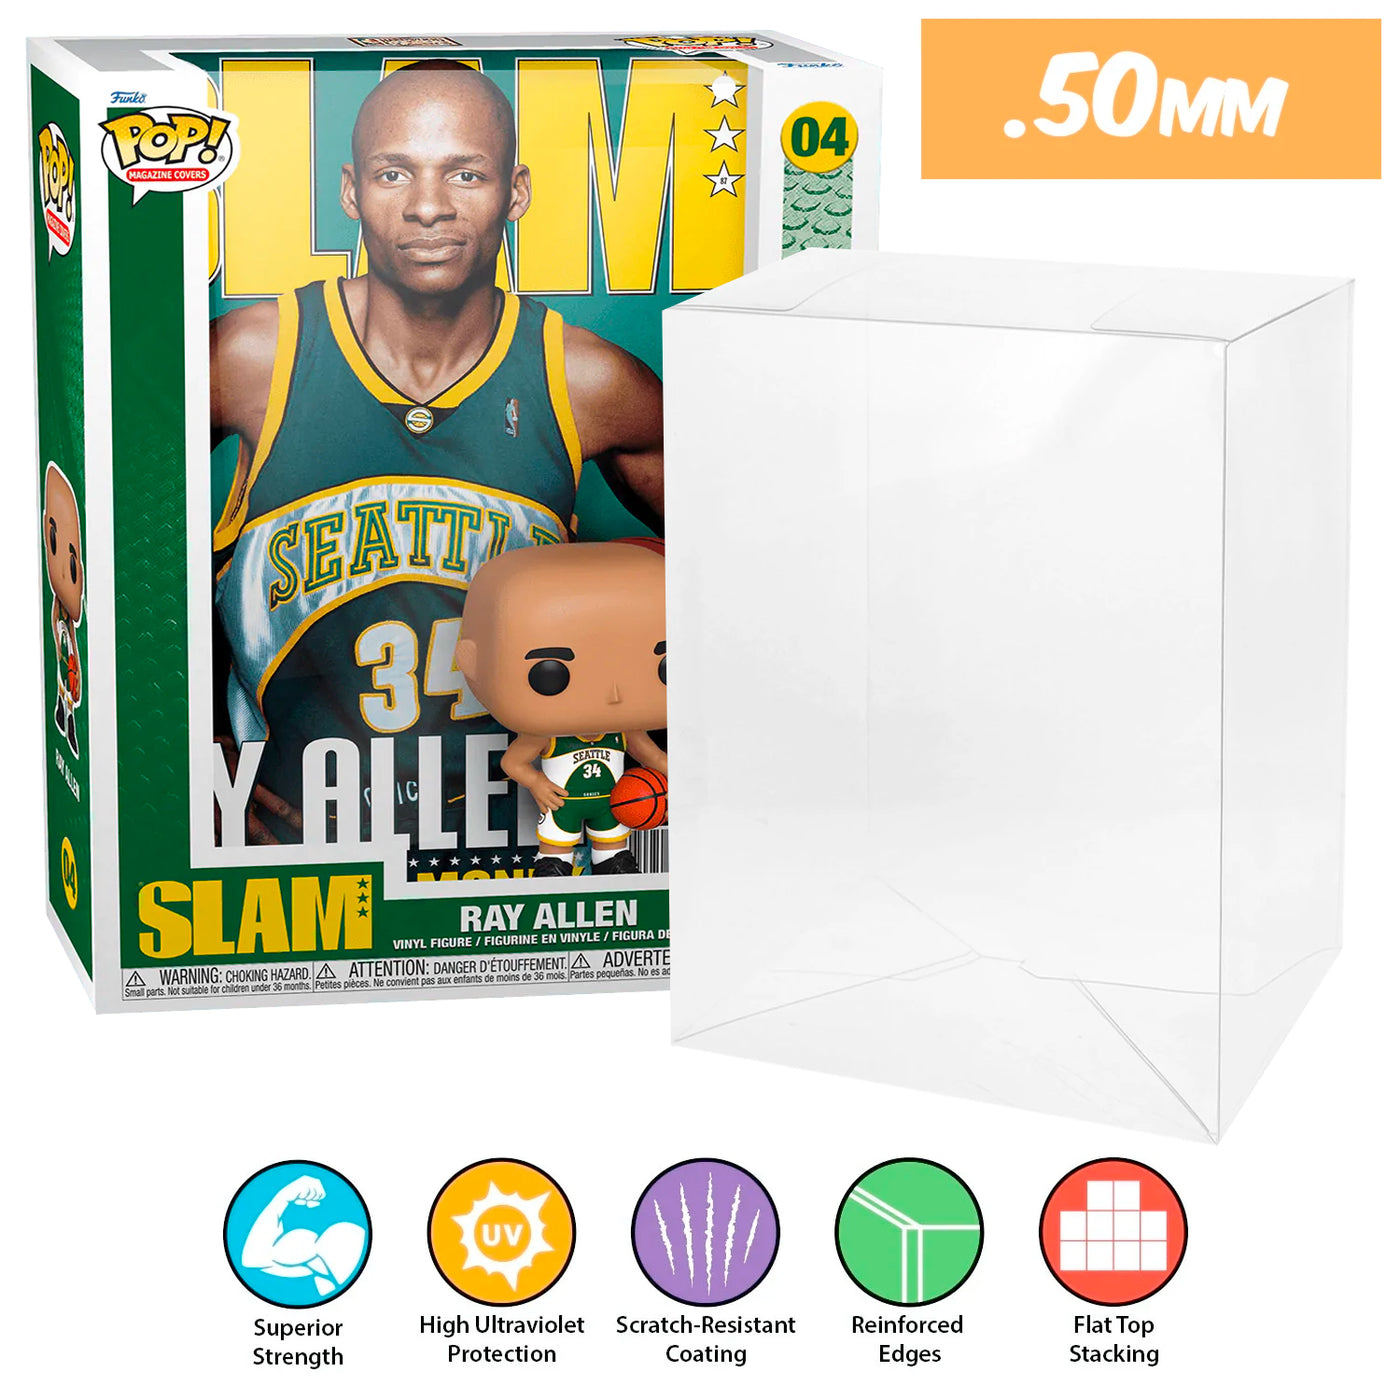 04 ray allen pop magazines covers slam nba best funko pop protectors thick strong uv scratch flat top stack vinyl display geek plastic shield vaulted eco armor fits collect protect display case kollector protector